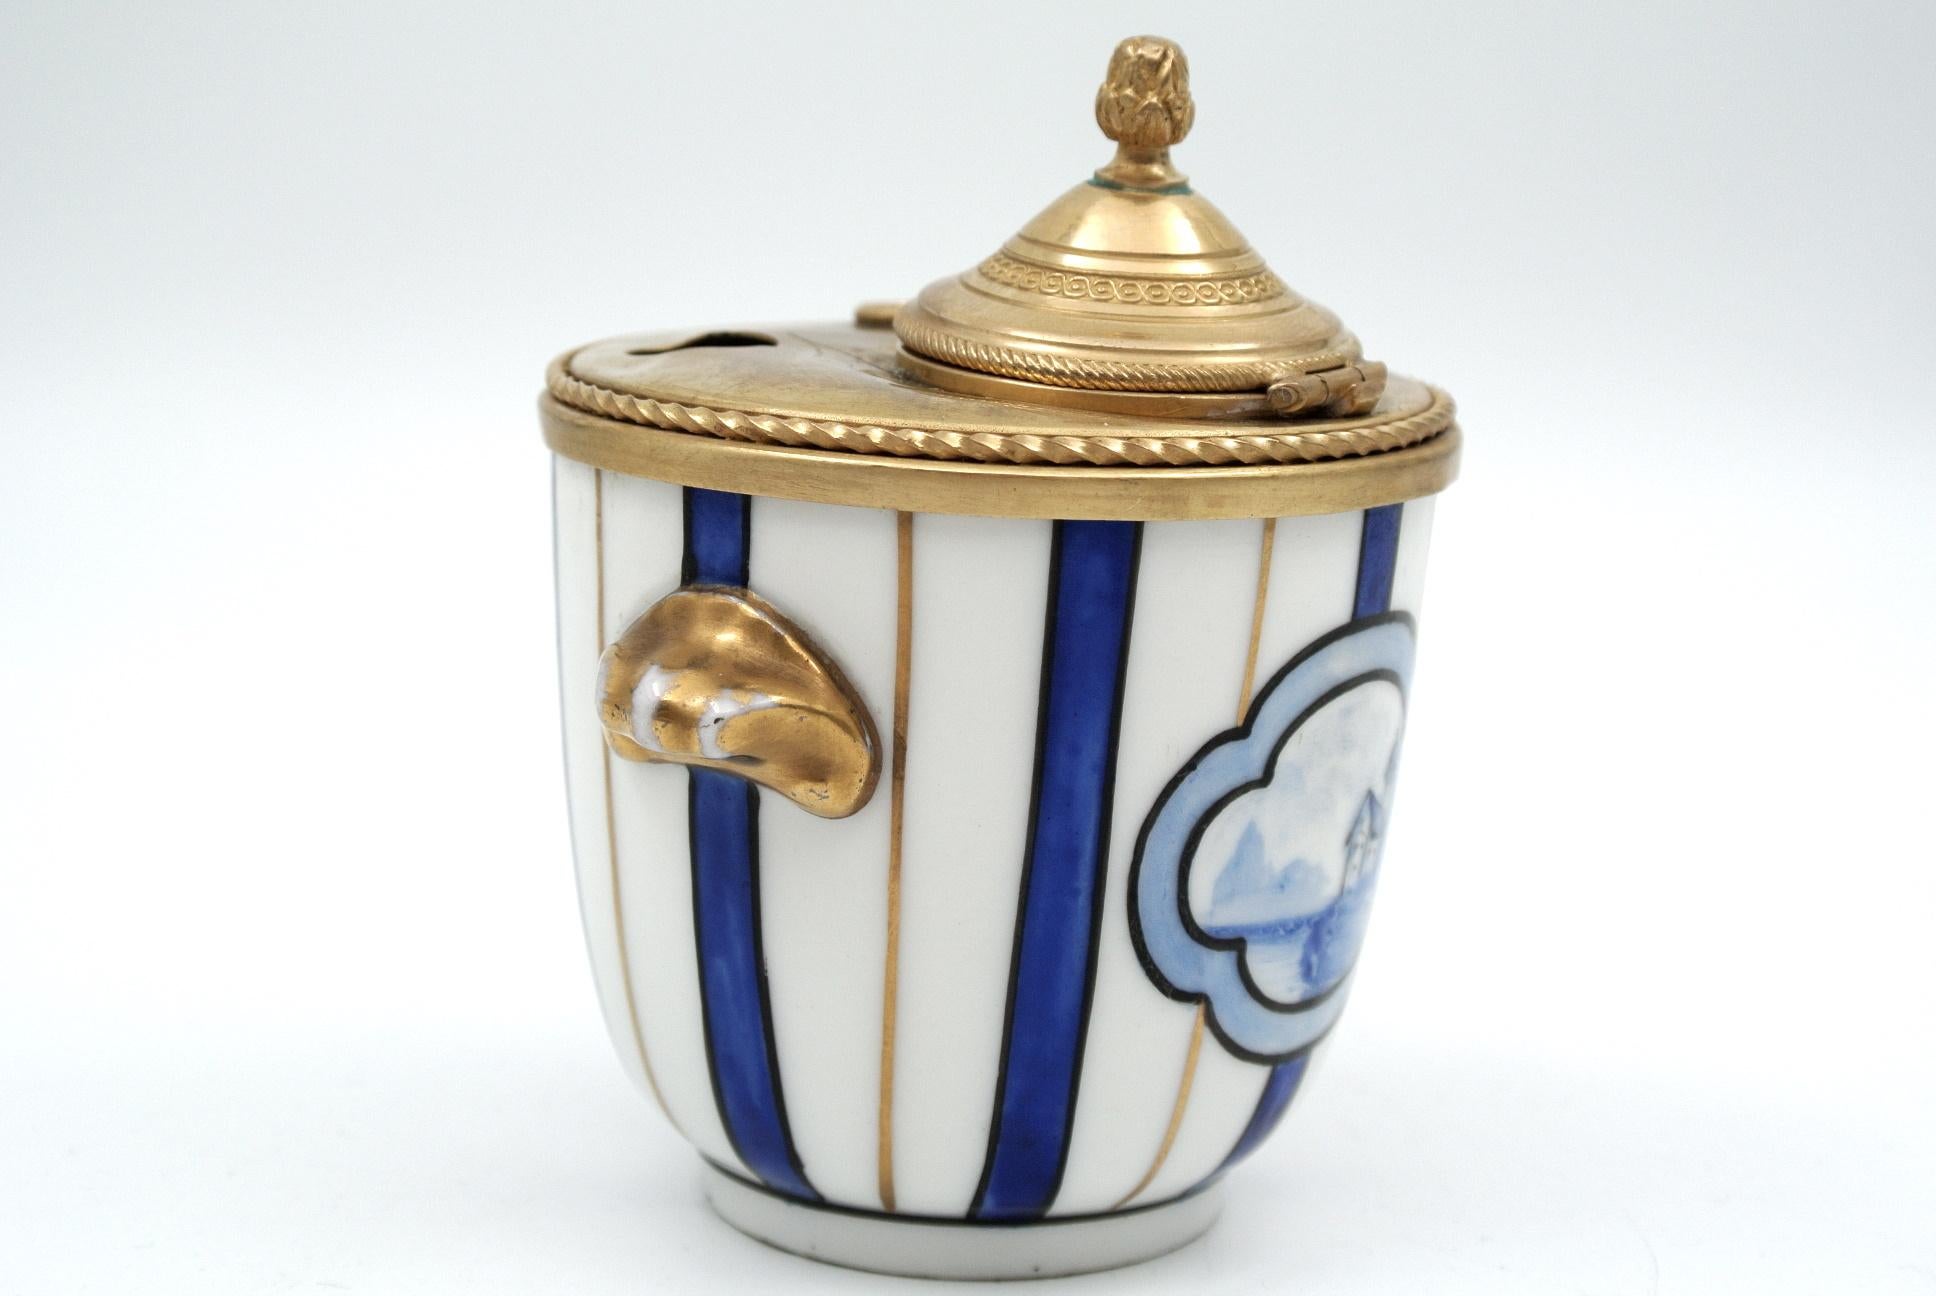 Napoleon III Inkwell in Gilded Brass and Porcelain